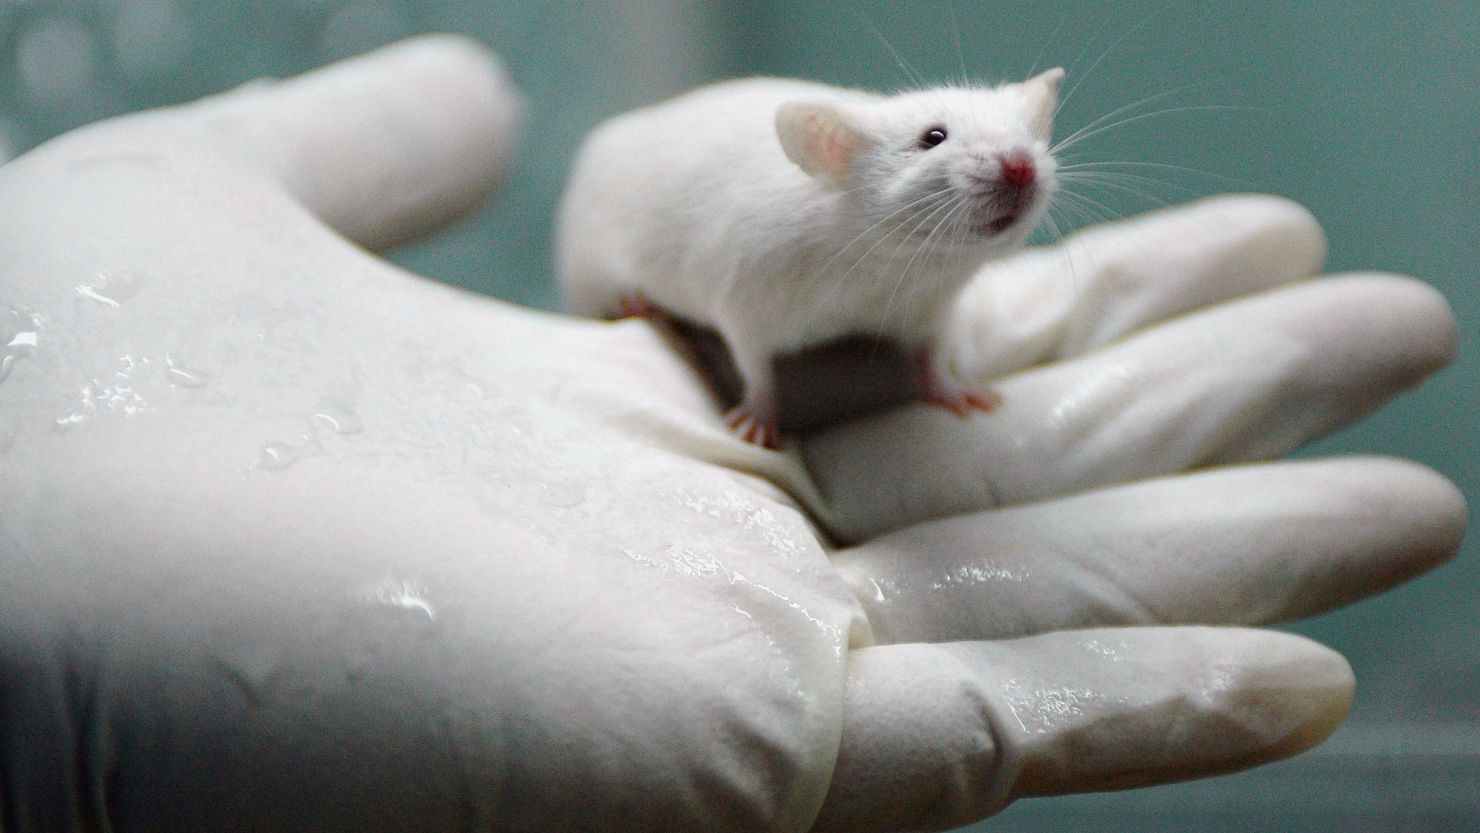 Rats in the U.S. and Brazil linked by electrodes to their brains helped solve problems together, researchers say.